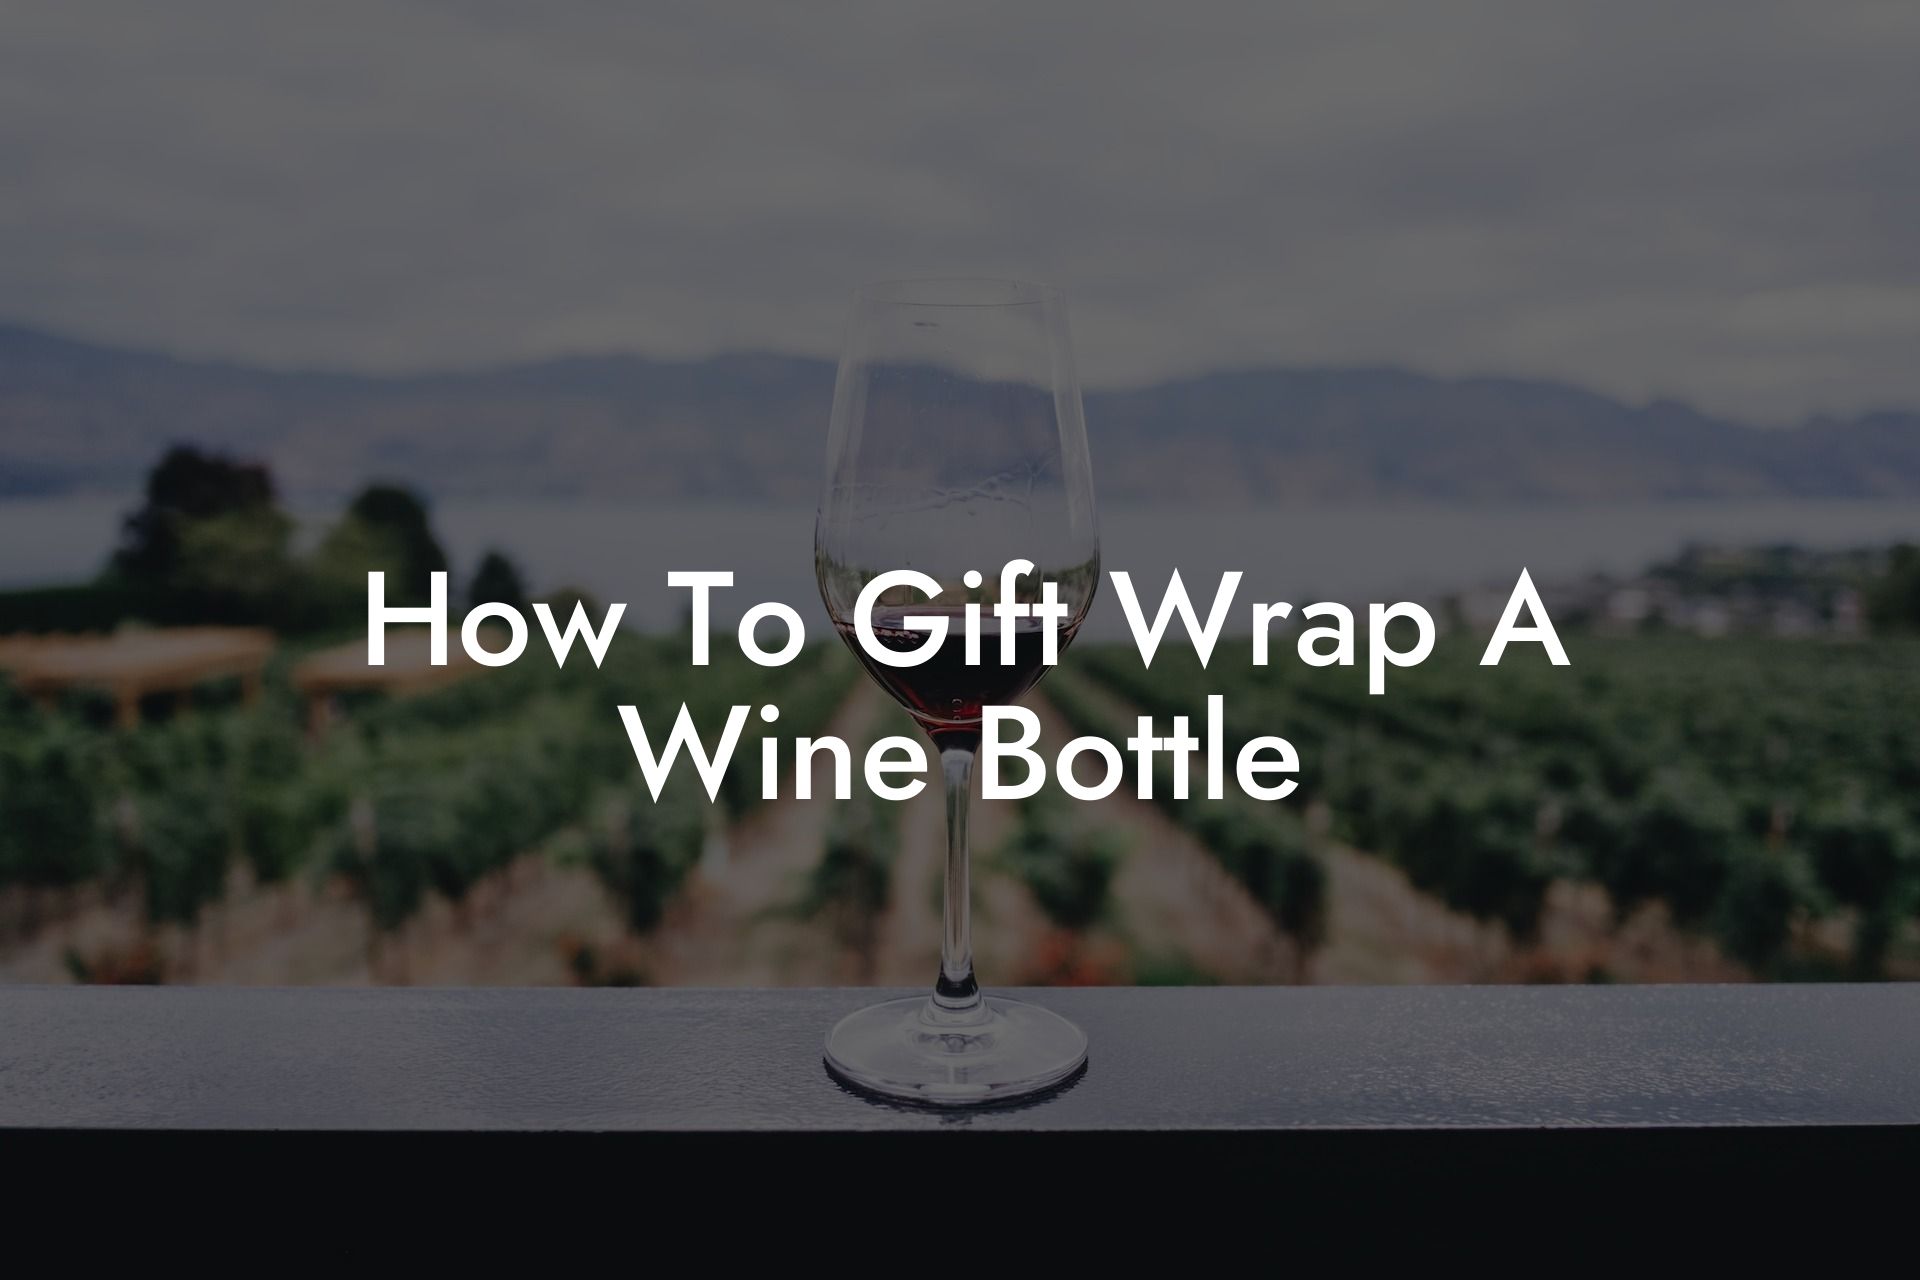 How To Gift Wrap A Wine Bottle